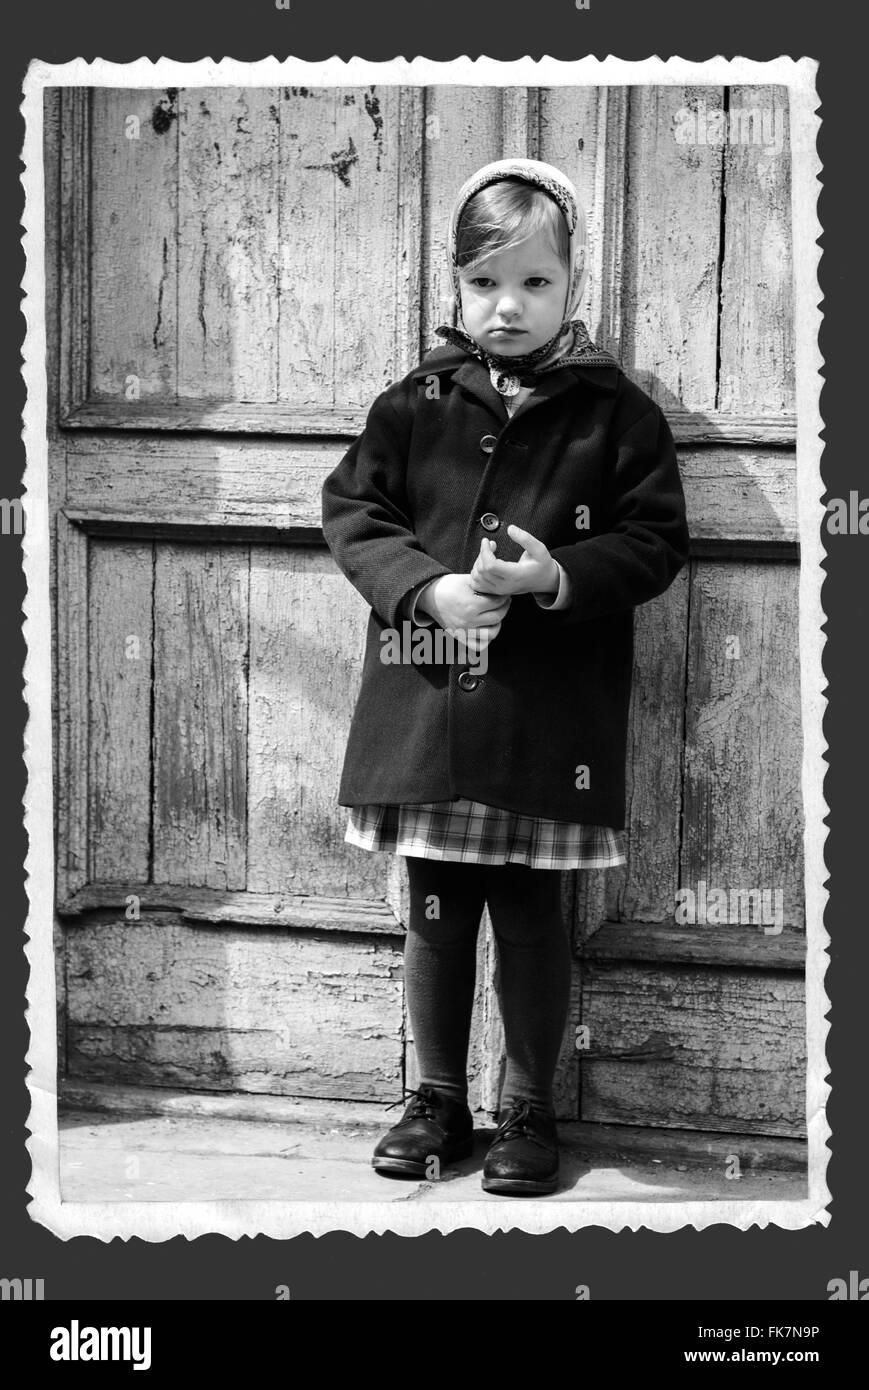 Photo in retro style. Cute little girl in a kerchief. Selective focus. Stock Photo